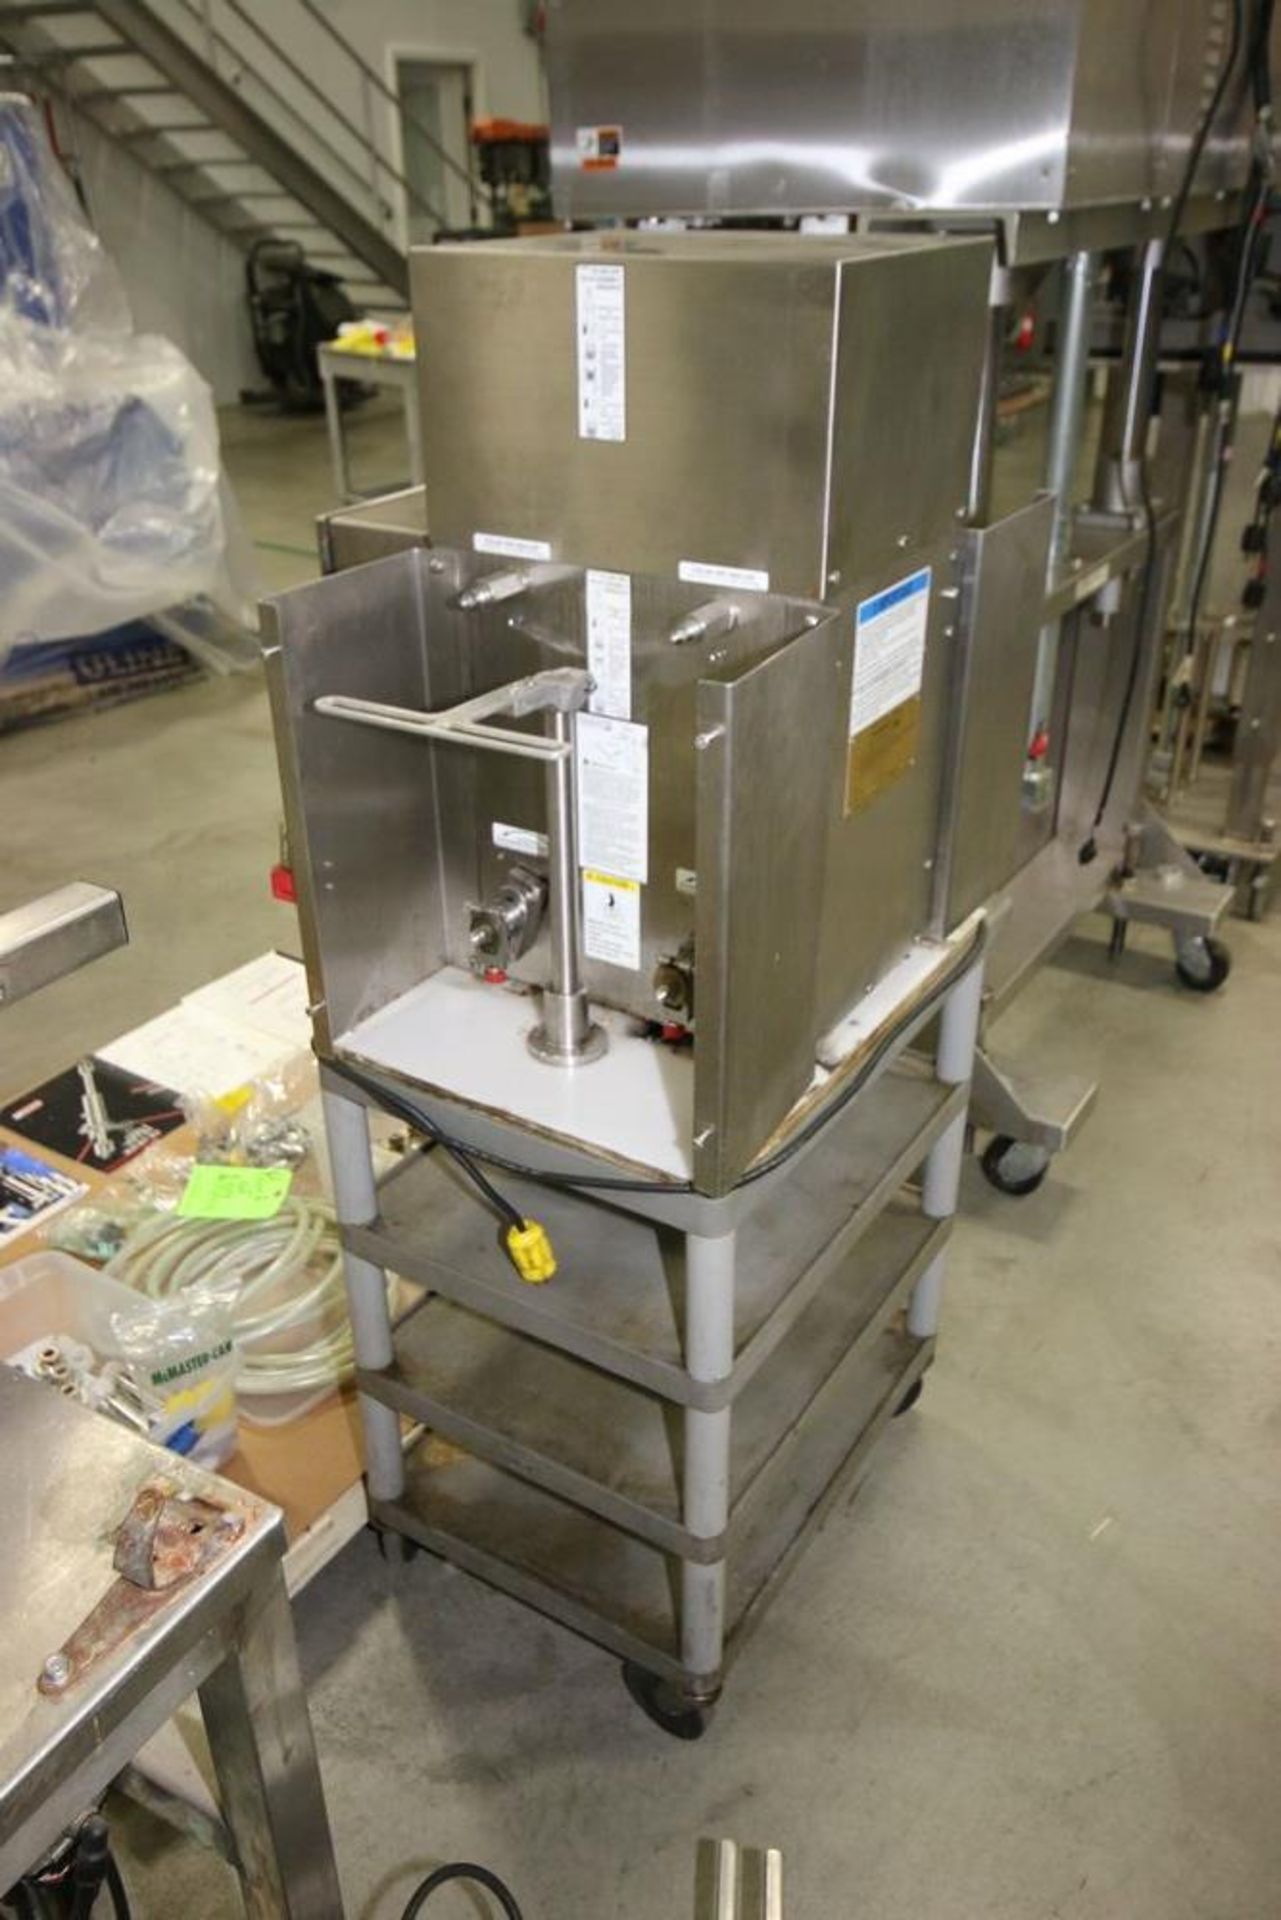 Filamatic Liquid Filling Machine, M/N DAB-8-4, S/N 021238, with Foot Pedal, with Spare Parts - Image 5 of 7